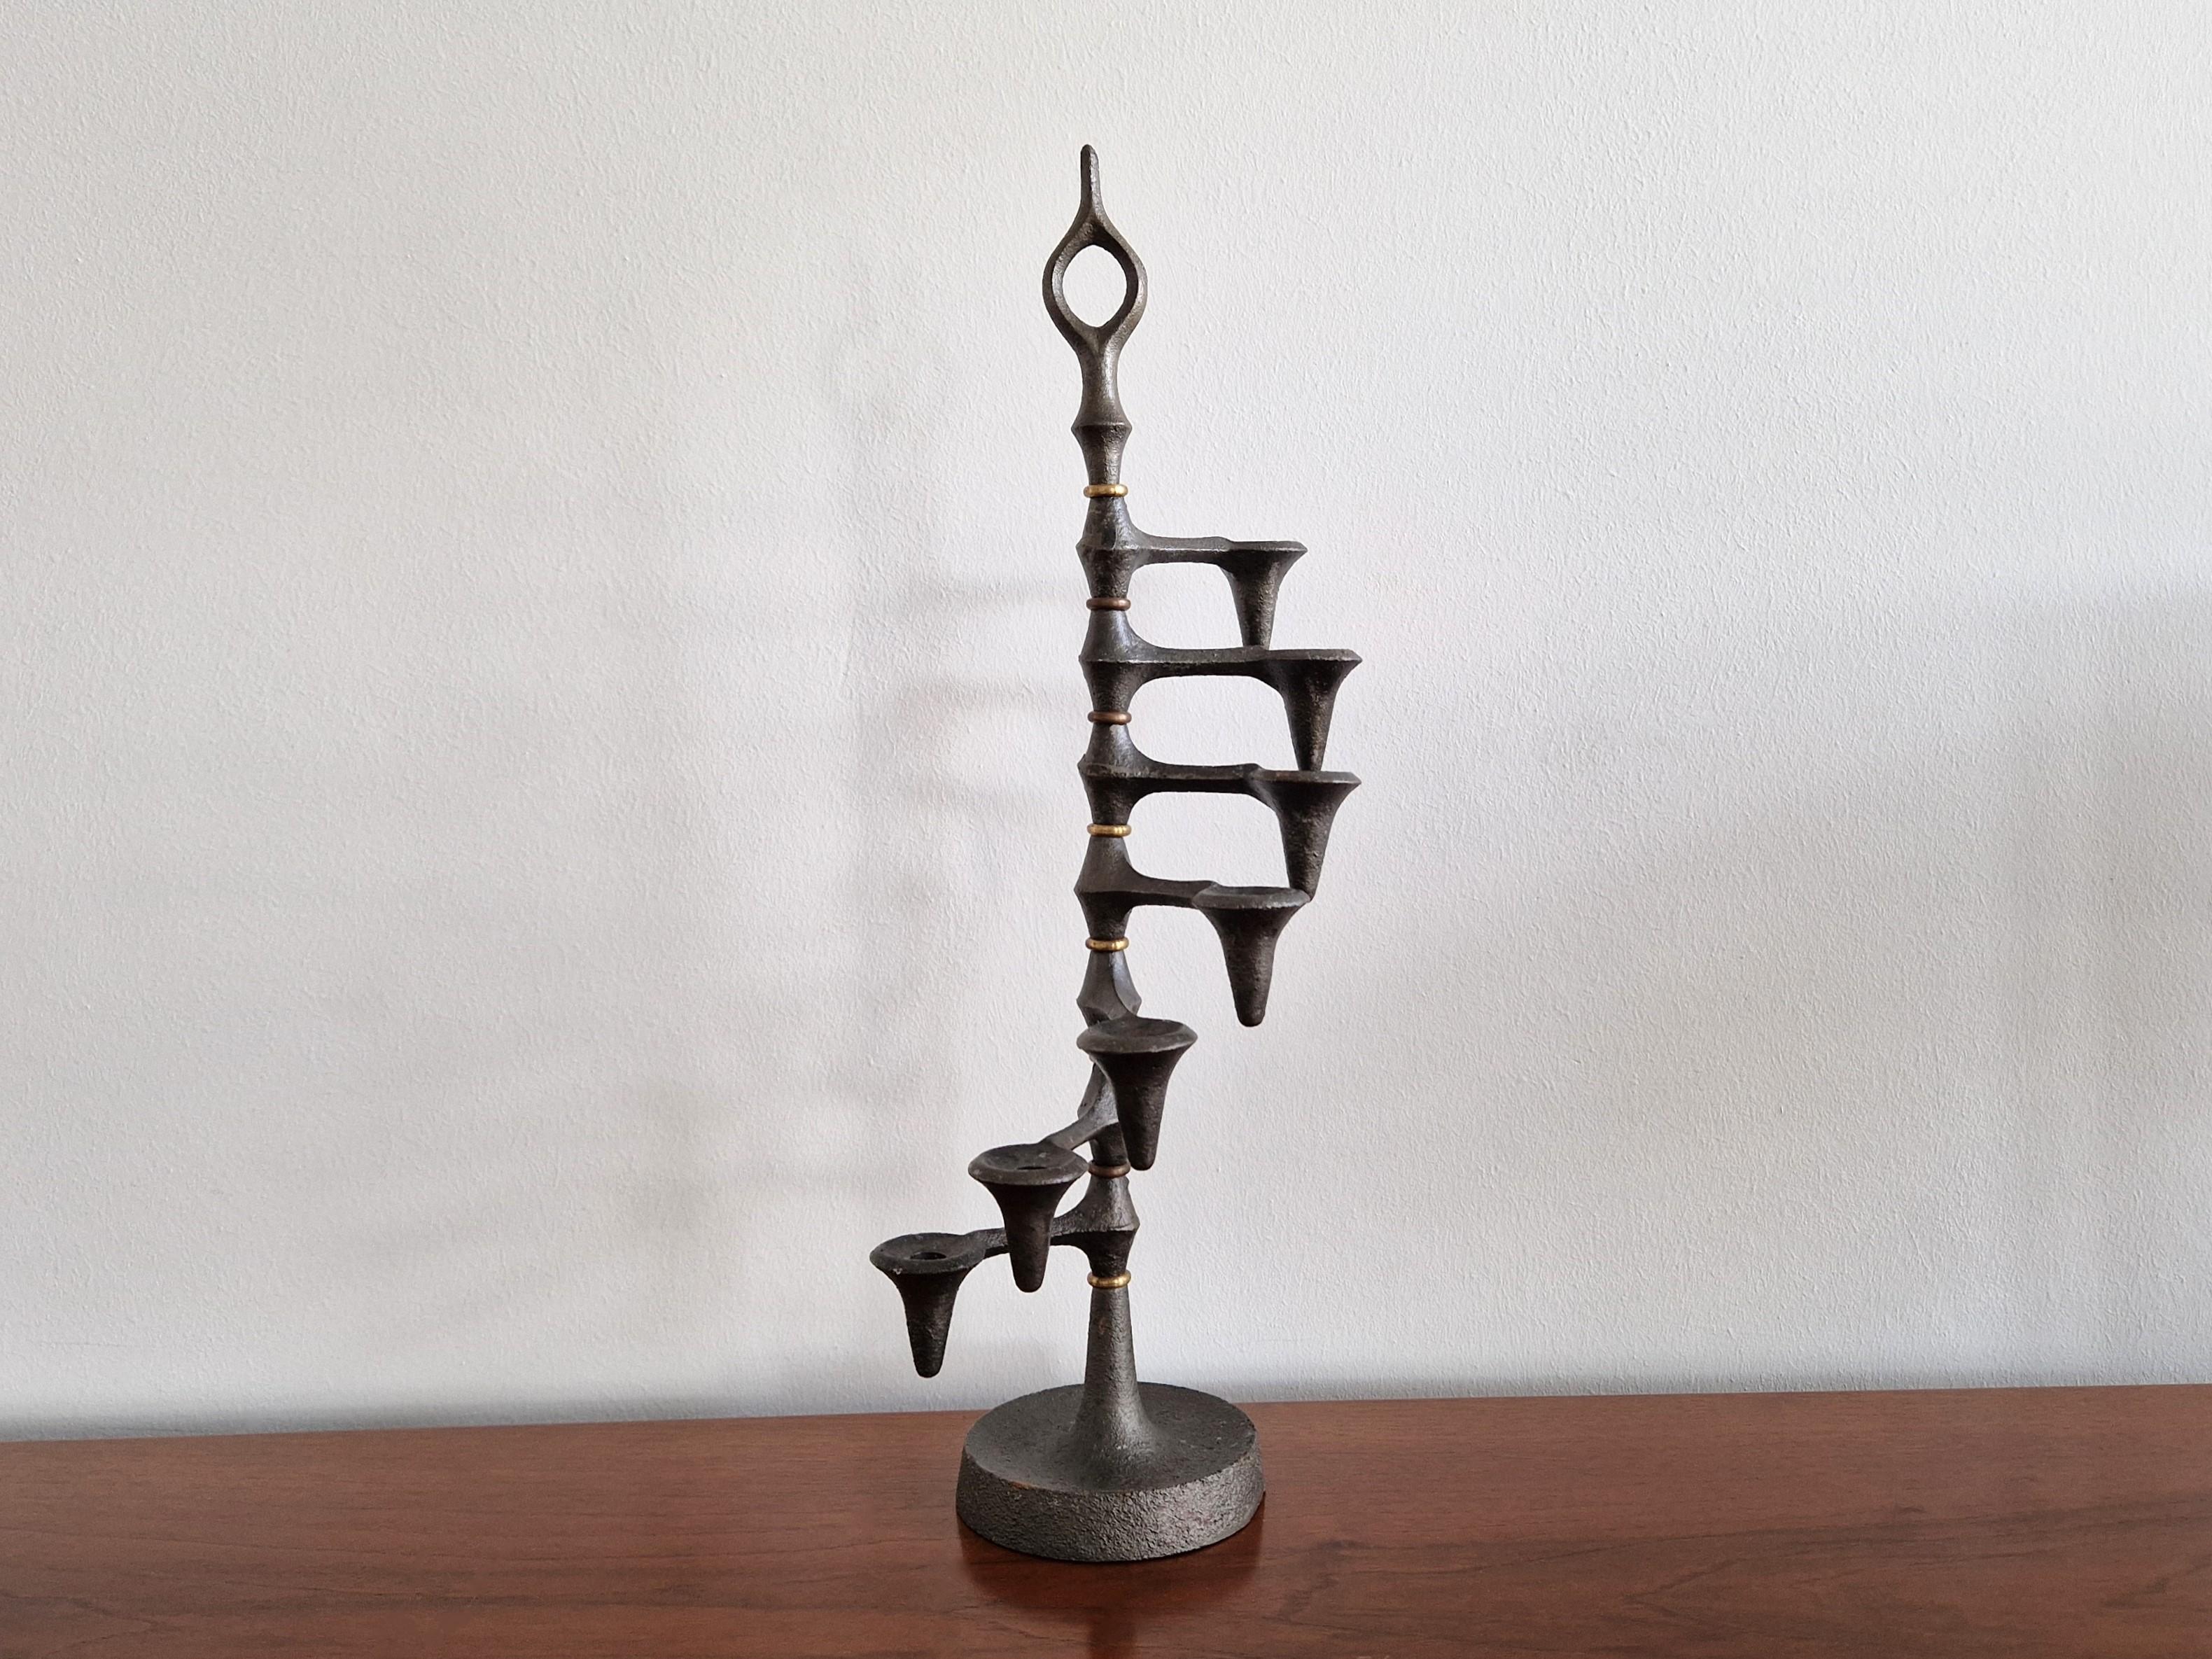 This iconic candelabra or candle holder was designed by Jens Quistgaard in the 1960s. A brutalist design that is made out of cast iron and brass. It has 7 adjustable arms that can rotate in any position.  We have 3 of these candelabra's available